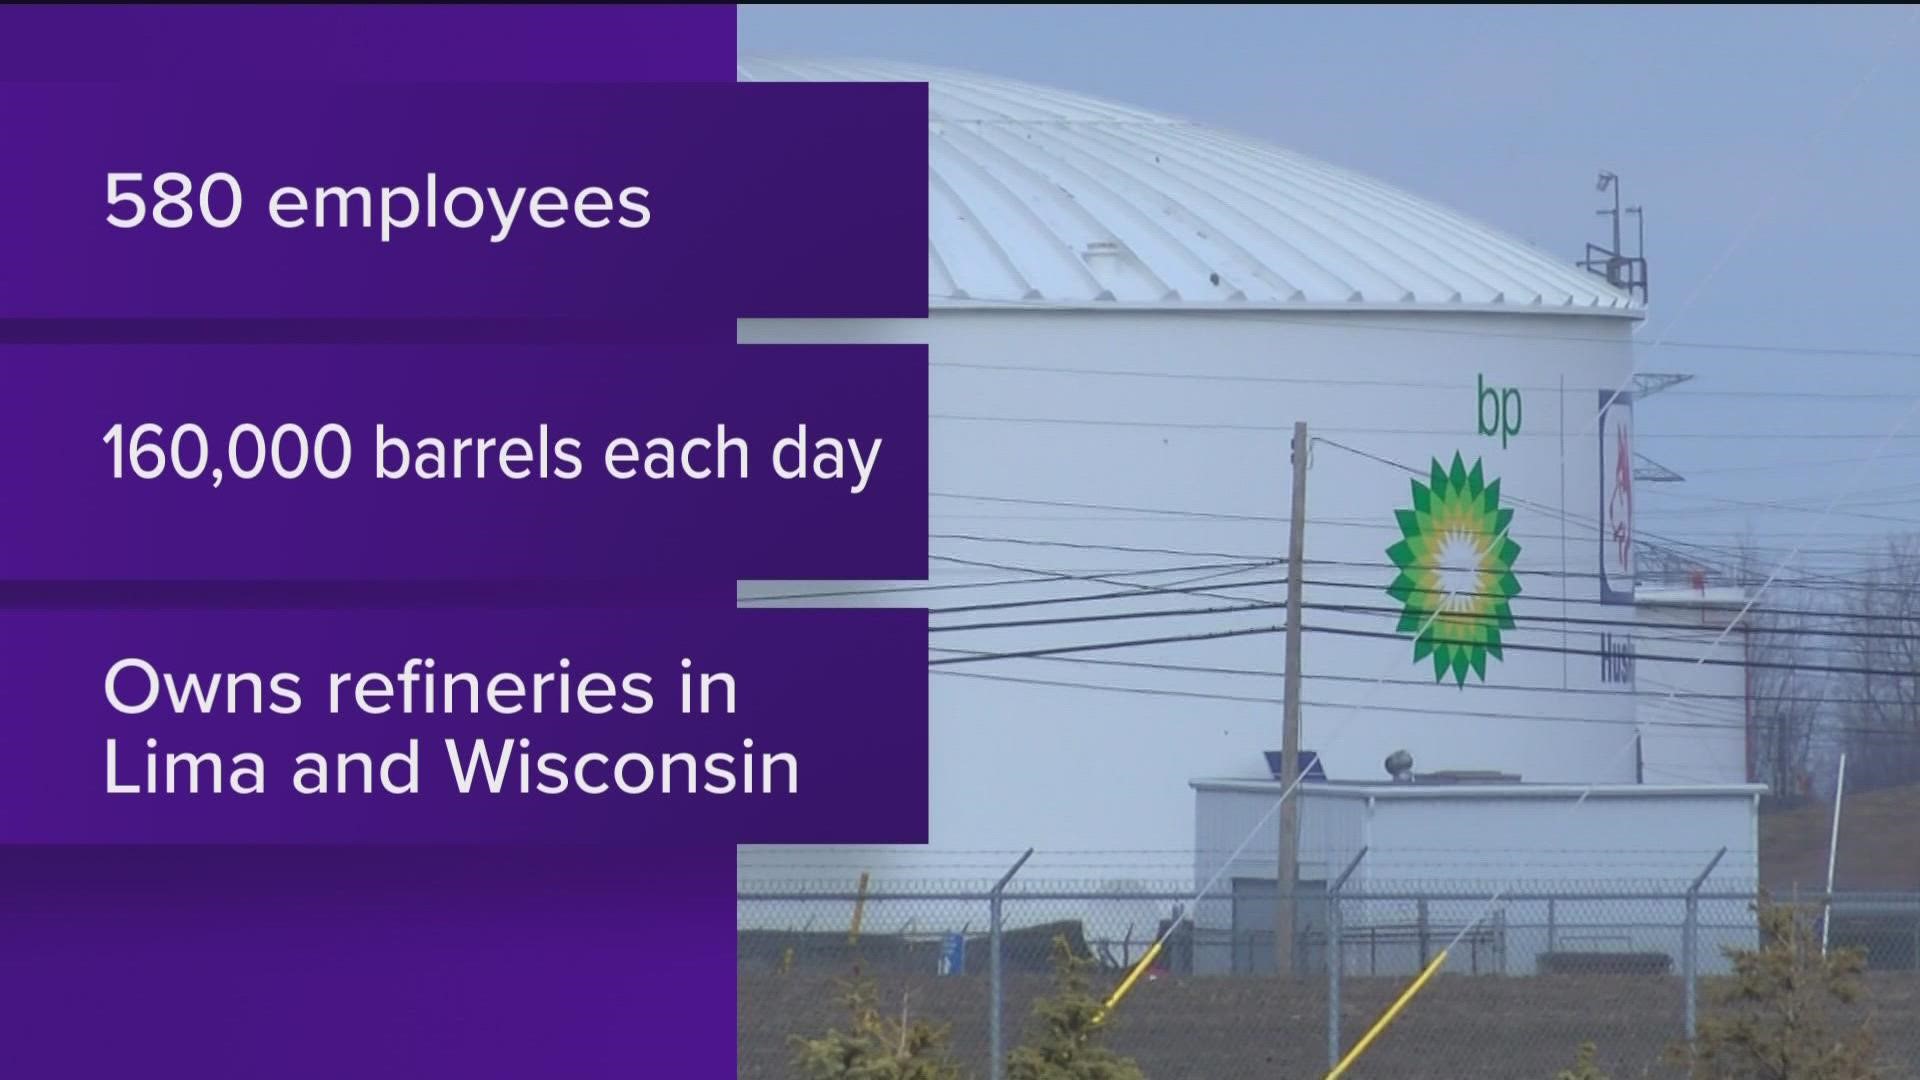 More than 580 BP refinery workers are expected to become Cenovus employees at closing